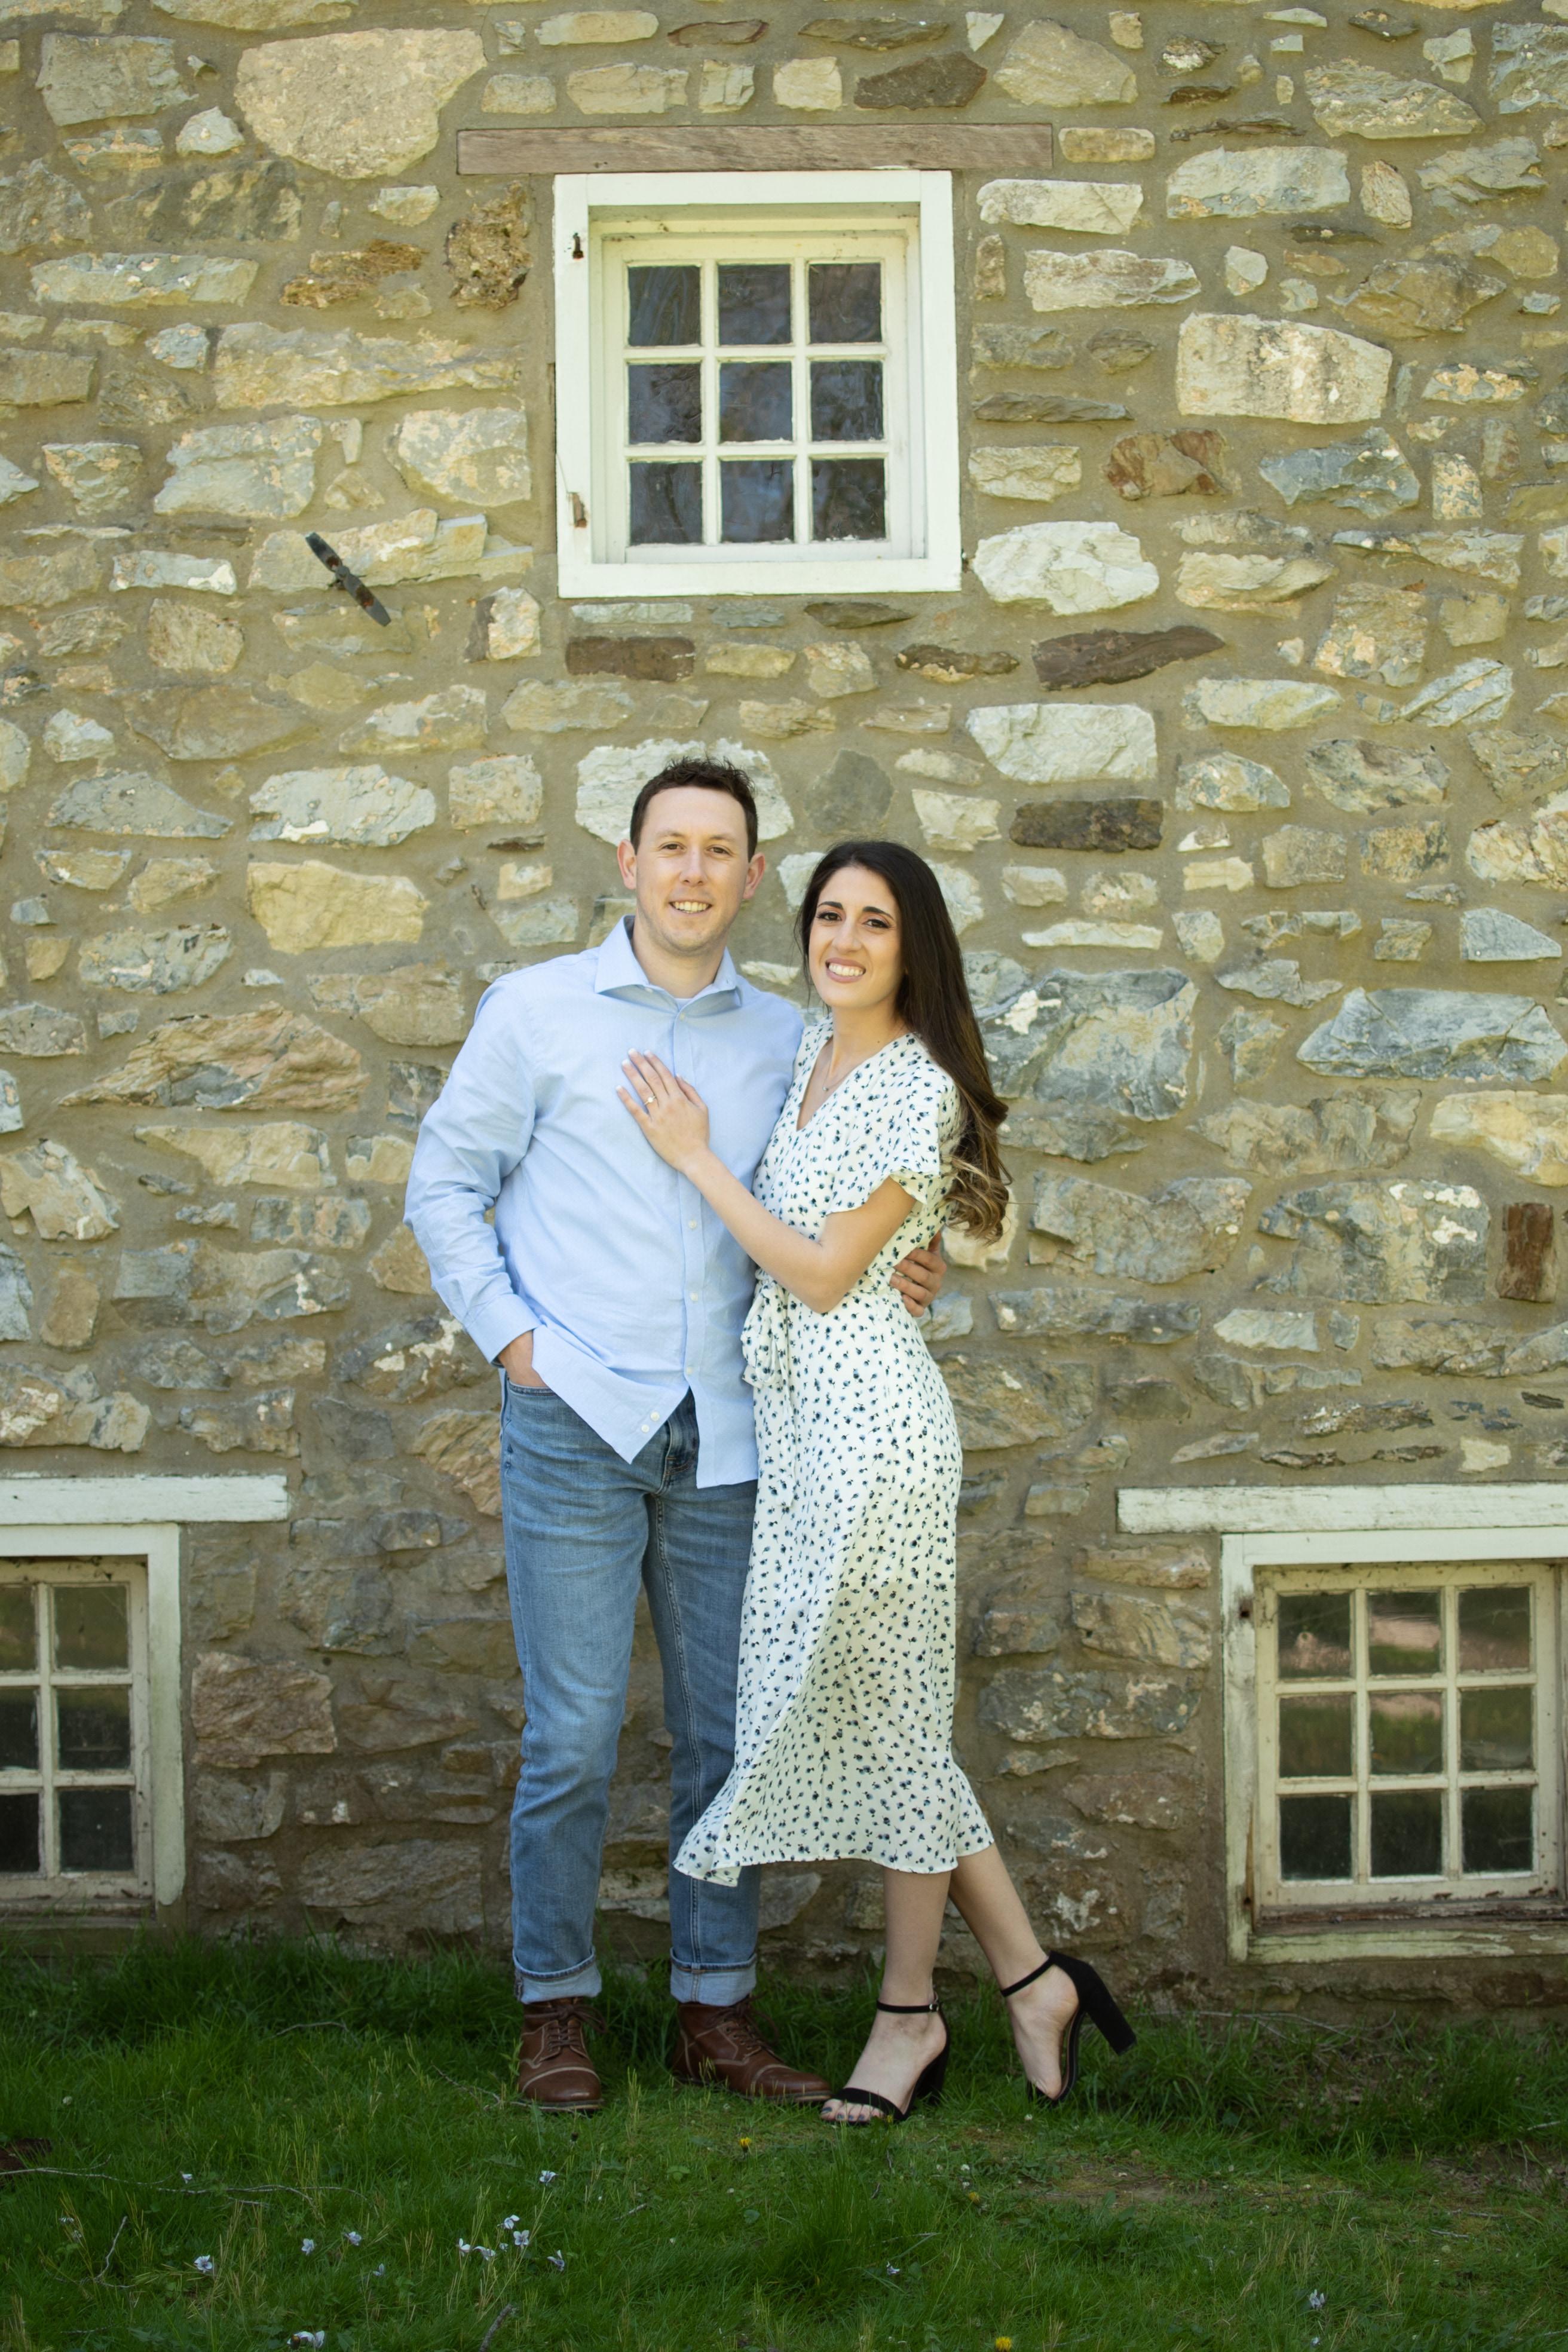 The Wedding Website of Donielle Tubioli and Tyler Schnapp